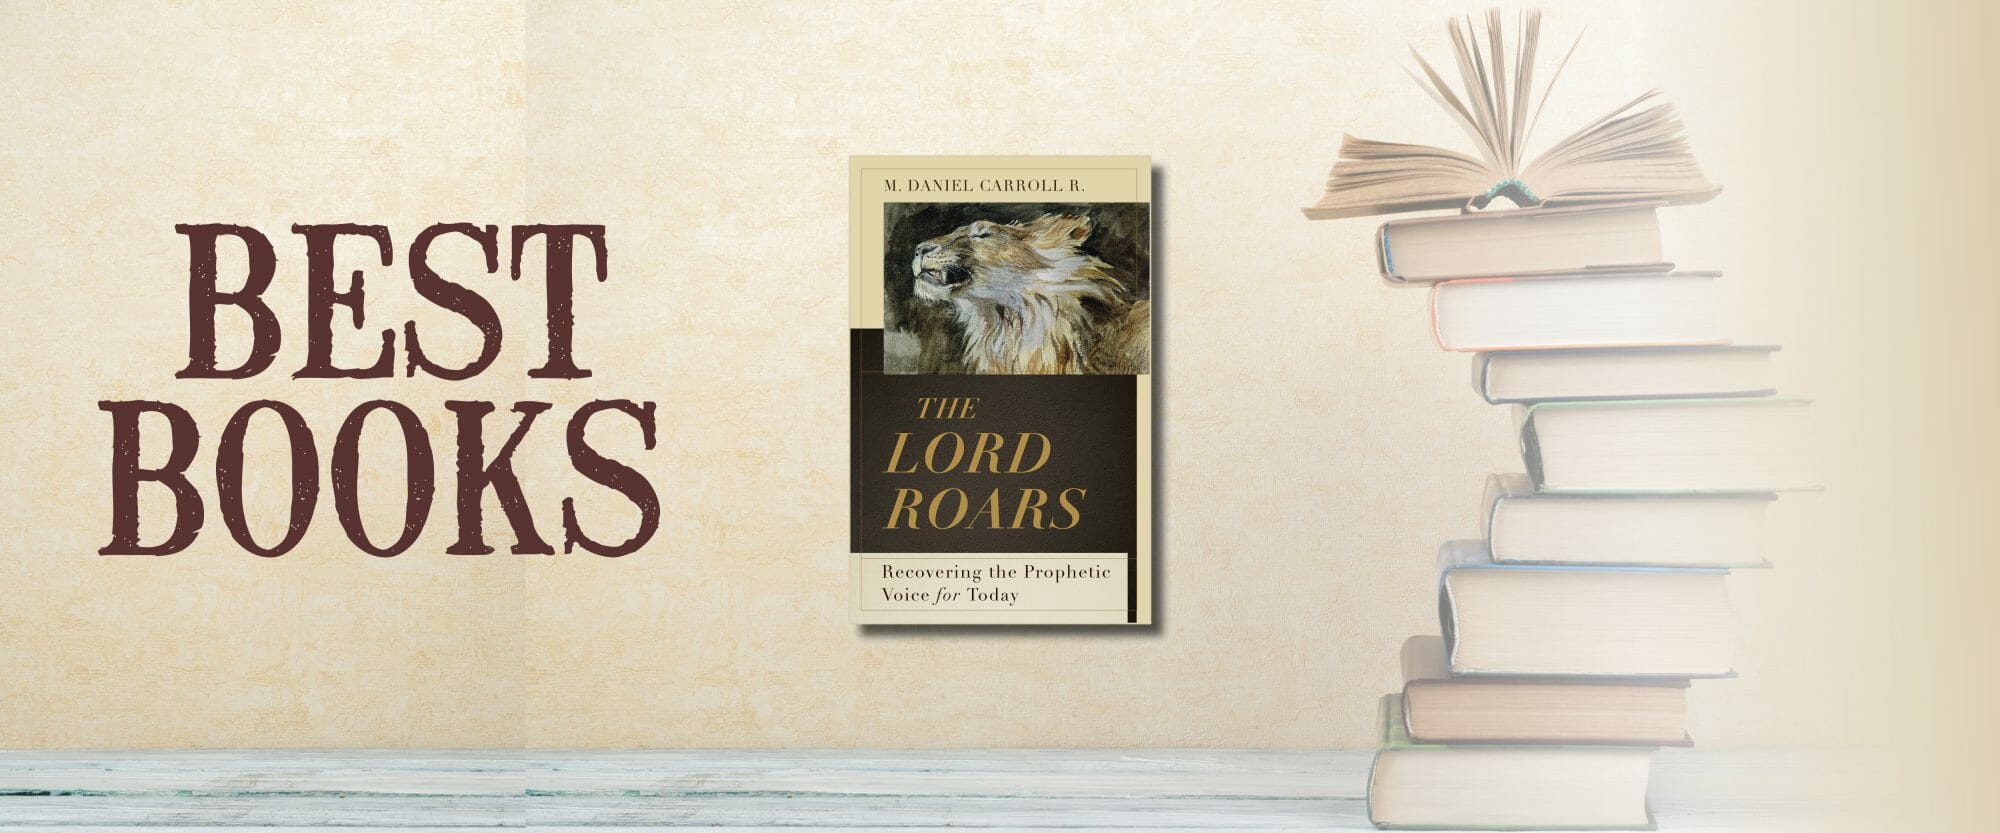 Best Books 1022 the Lord Roars